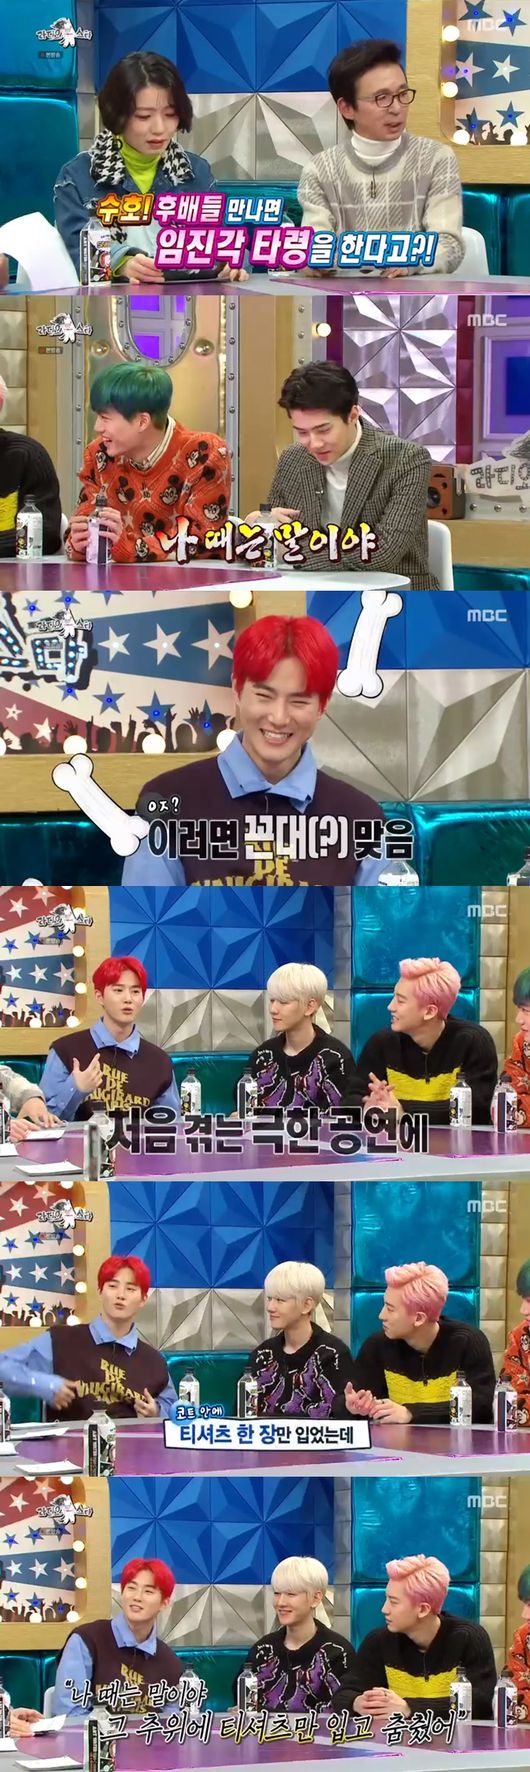 Suho of the group EXO became the main character of Radio Star and laughed.In MBC Radio Star broadcasted on the last 4 days, EXO members Chen, Kai, Baekhyun, Chanyeol, Suho and Sehun appeared in EXO Radio Star feature.On the day, the members pointed to Suho as a Slack member during Slack; Sehun said, When you go to music broadcasts, Suho is out in the hallway.Im always talking to my juniors when I see them, he said.Suho said: When I made my debut, I went to Imjingak, it was so cold, I think I laugh when I think that people cant do it in extreme circumstances, and I threw off my coat and danced coolly.So I told my juniors that I do not go to Imjingak these days. We ate kimbap, and after our debut, we only went out until two or three years ago and ate kimbap, but these days, the children ate sulleungtang, Baekhyun said.Gim Gu-ra asked, Do you mean NCT these days? So Baekhyun said, Yes, and made the surroundings into a laughing sea.Chen said, Sehun is also Slack. When I drink, I tell him not to eat it. I went to the sauna together and he always said that he was hangover in the sauna.Baekhyun said: Sehun smells a lot of dads, when when the door bangs when youre living in a former quarters, it was Sehun.I get drunk and come into the room and call it my son. Baekhyun said, Suho is neutral, neither side is listening, and and the house is good.I am alive for a long time as a puppy, he said, making the surrounding area into a laughing sea.On this day, the members said that Suho was tired and made the surroundings into a laughing sea. When you spill kimchi soup on your clothes, you get up and go to suck.And I do not eat rice and I keep cleaning the clothes. Suho said there was a habit of Sehun that was just intolerable: Suho said, The outlets are all out, so Sehun said, because its so much stuck in.I come in at night, but if it is all good, it is not good to go out. Suho said, The image among the fans is like a church brother, but I am actually Buddhist.Meanwhile, Suho mentioned Suho alone as a private chat room in the EXO chat room, making the surroundings into a laughing sea; Suho said, Its like a private chat room of Chanyeol and Baekhyun.I do not have an answer if I ask something. Baekhyun said, I am talking about fun, but my brother suddenly asks seriously.I think its because Suhos brother is a leader, he said.Suho focused his attention on the fact that his black history has been accumulated since the Elementary student.Suho drank only water in embarrassment; Gim Gu-ra laughed, saying, Its the main character today.MBC Radio Star broadcast capture